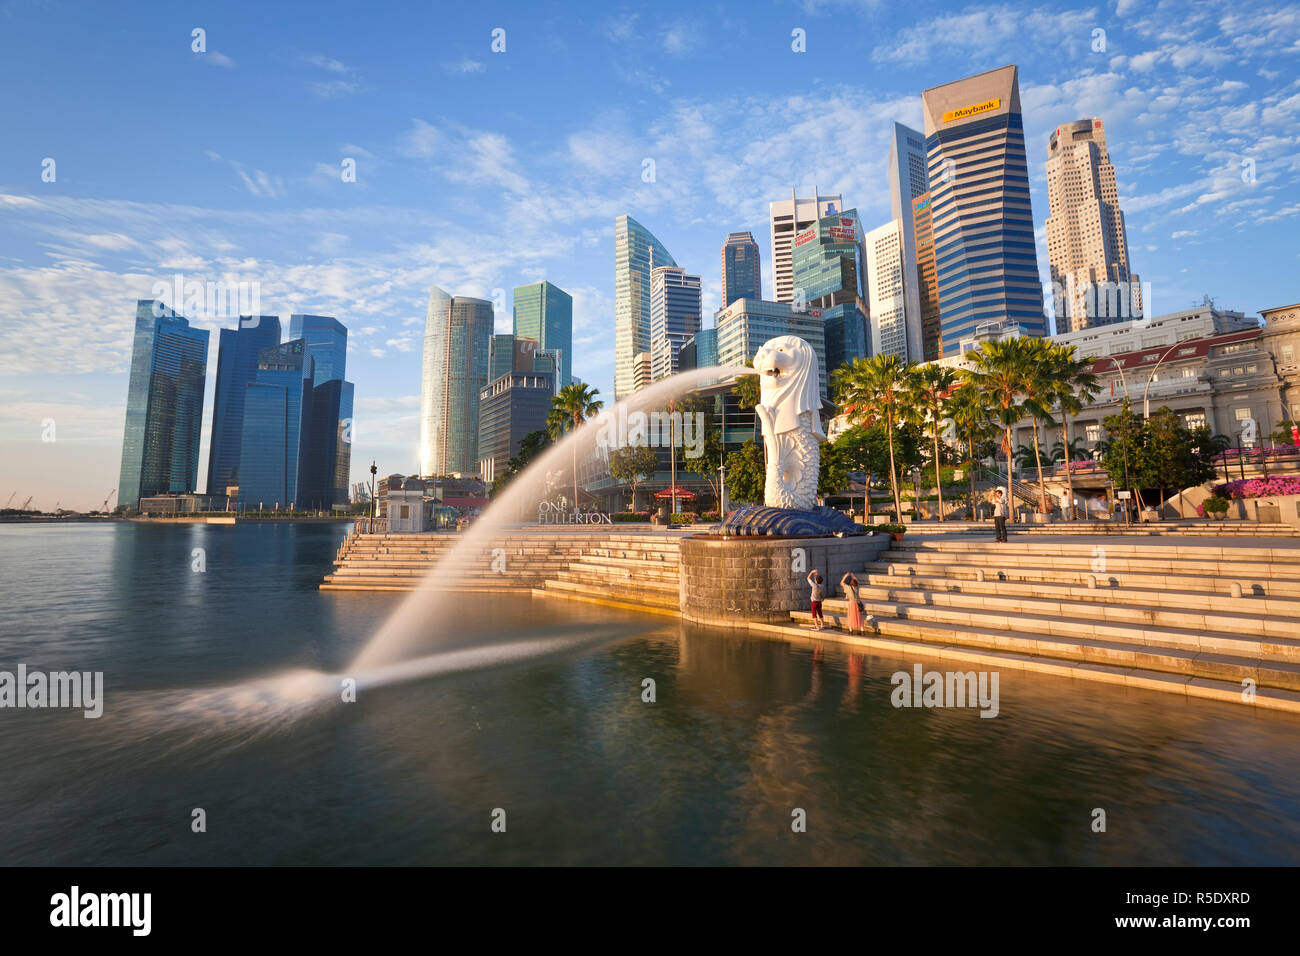 The Merlion Statue with the City Skyline in the background, Marina Bay, Singapore Stock Photo